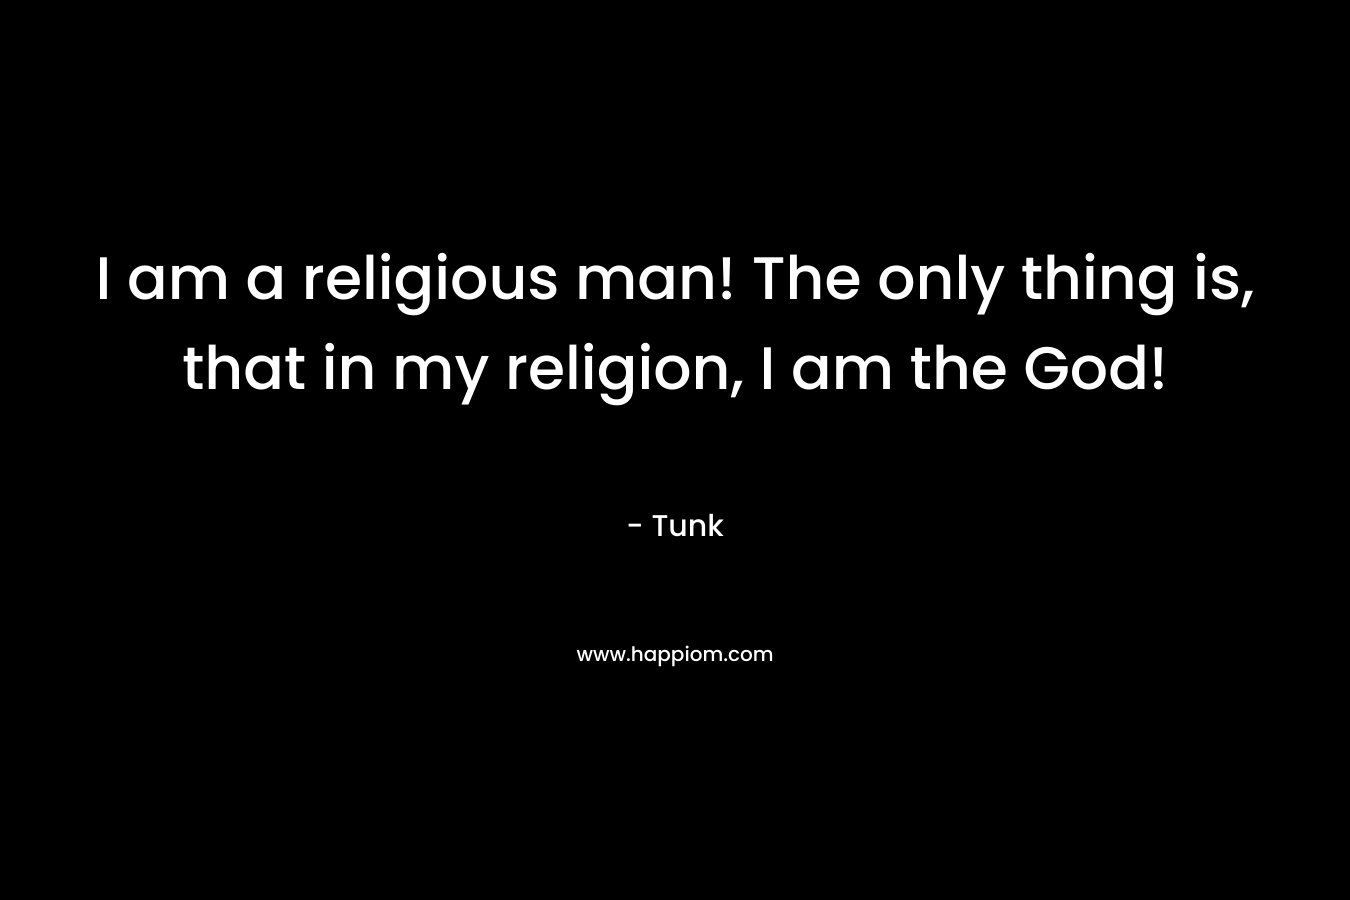 I am a religious man! The only thing is, that in my religion, I am the God!